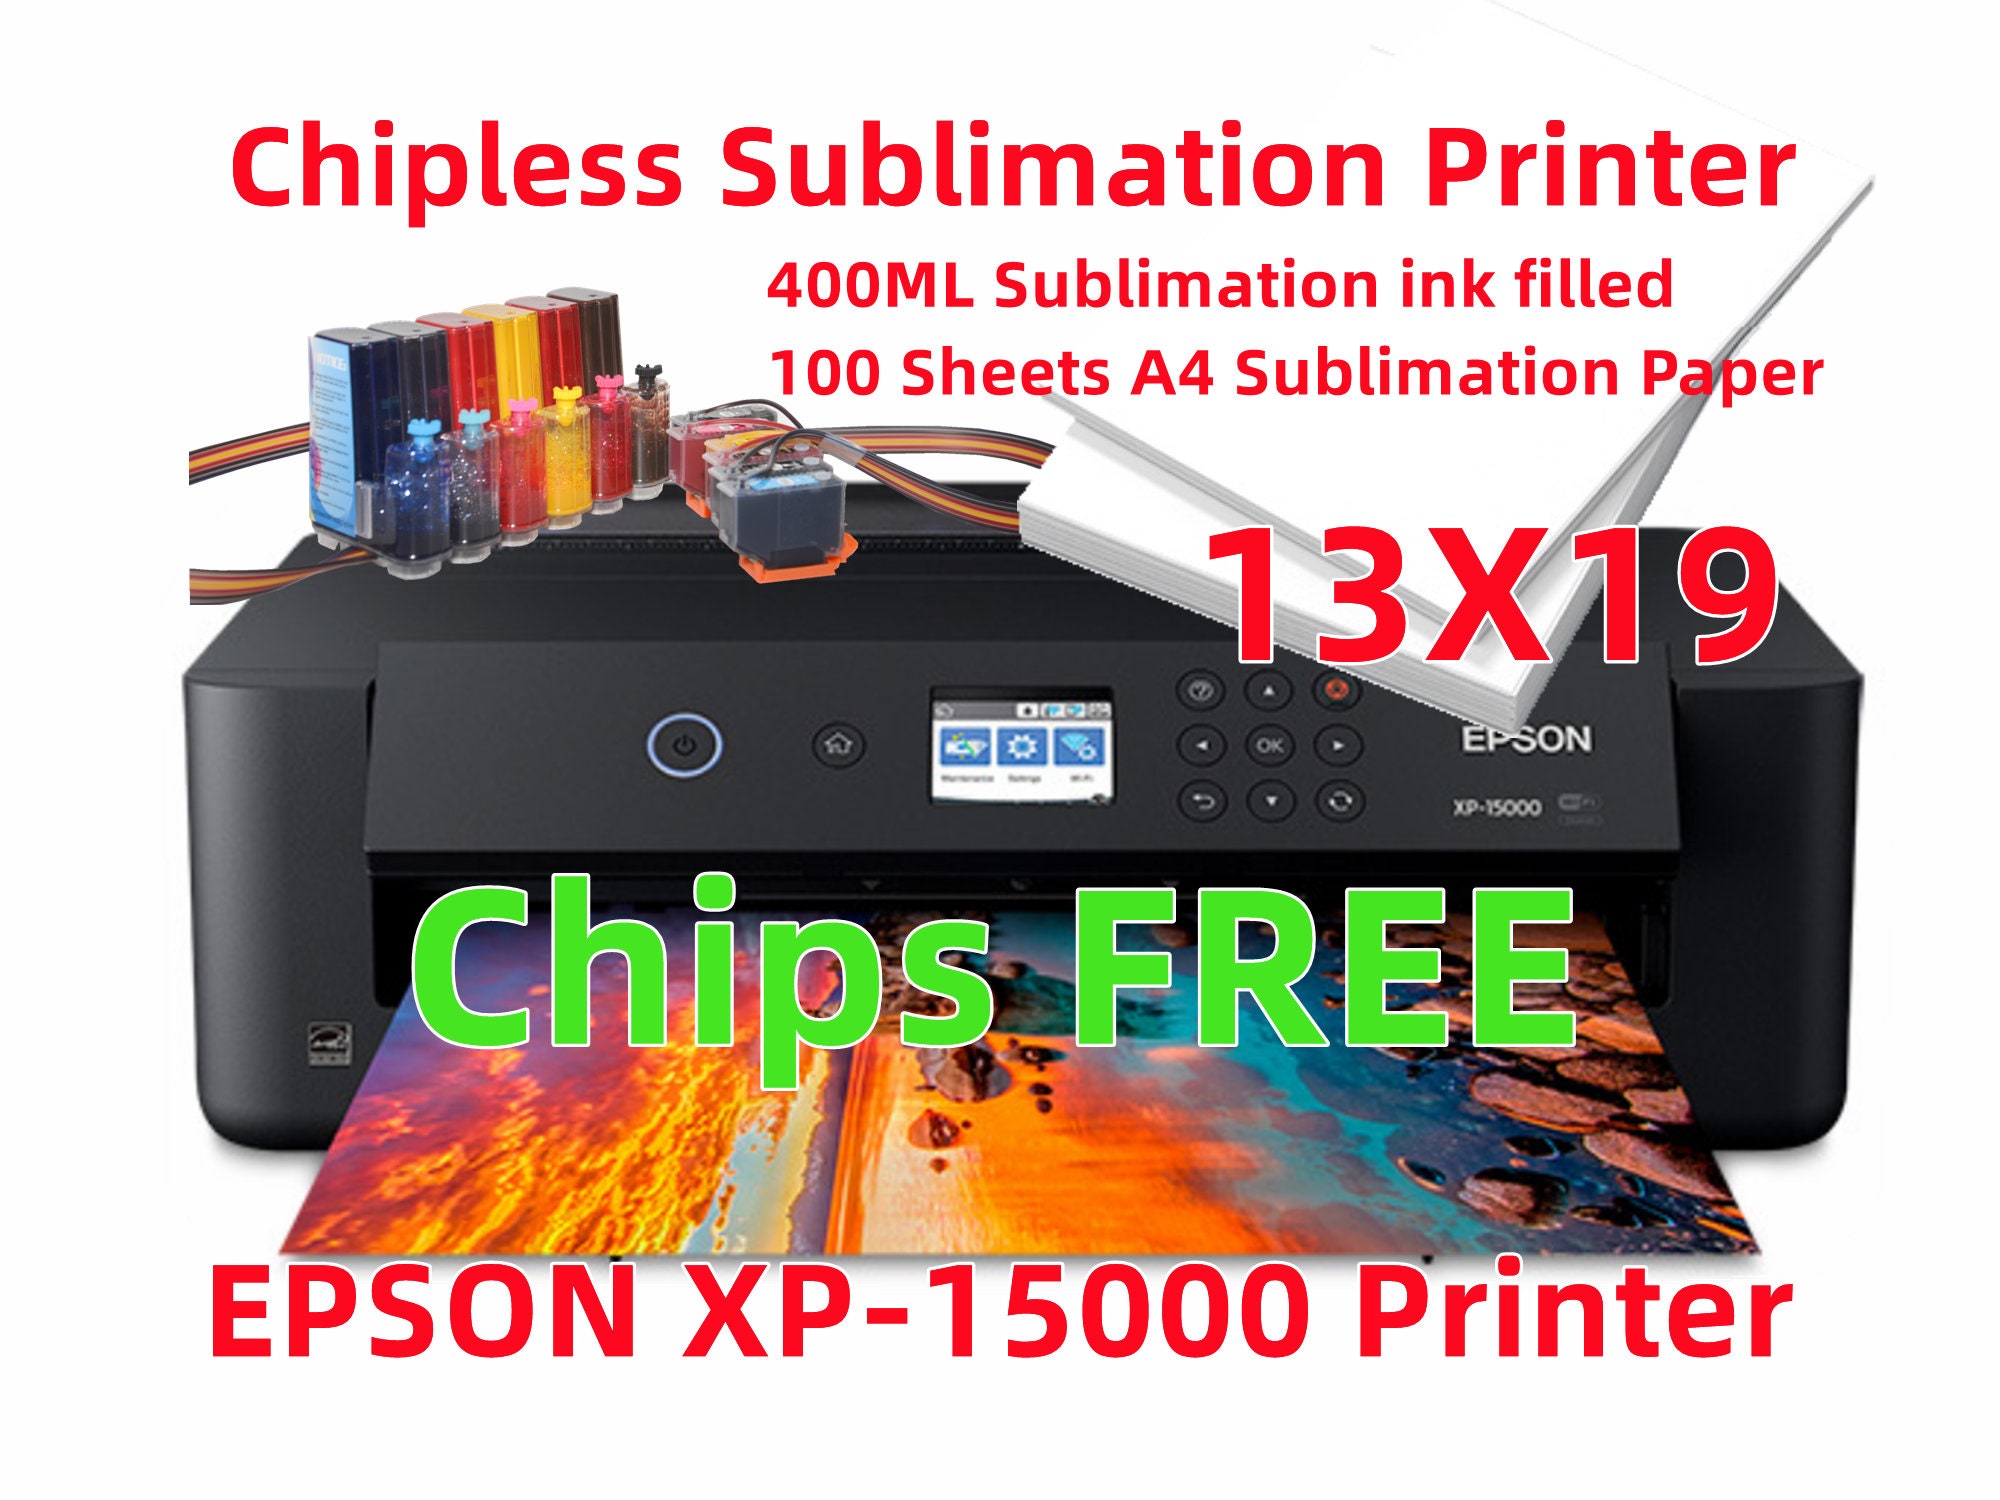 Epson Dye Sublimation DS Heat Transfer Printable Multi Use Paper, 85GSM,  8.5 X14 100 Sheet Pack for Epson F570/F170 S450363 